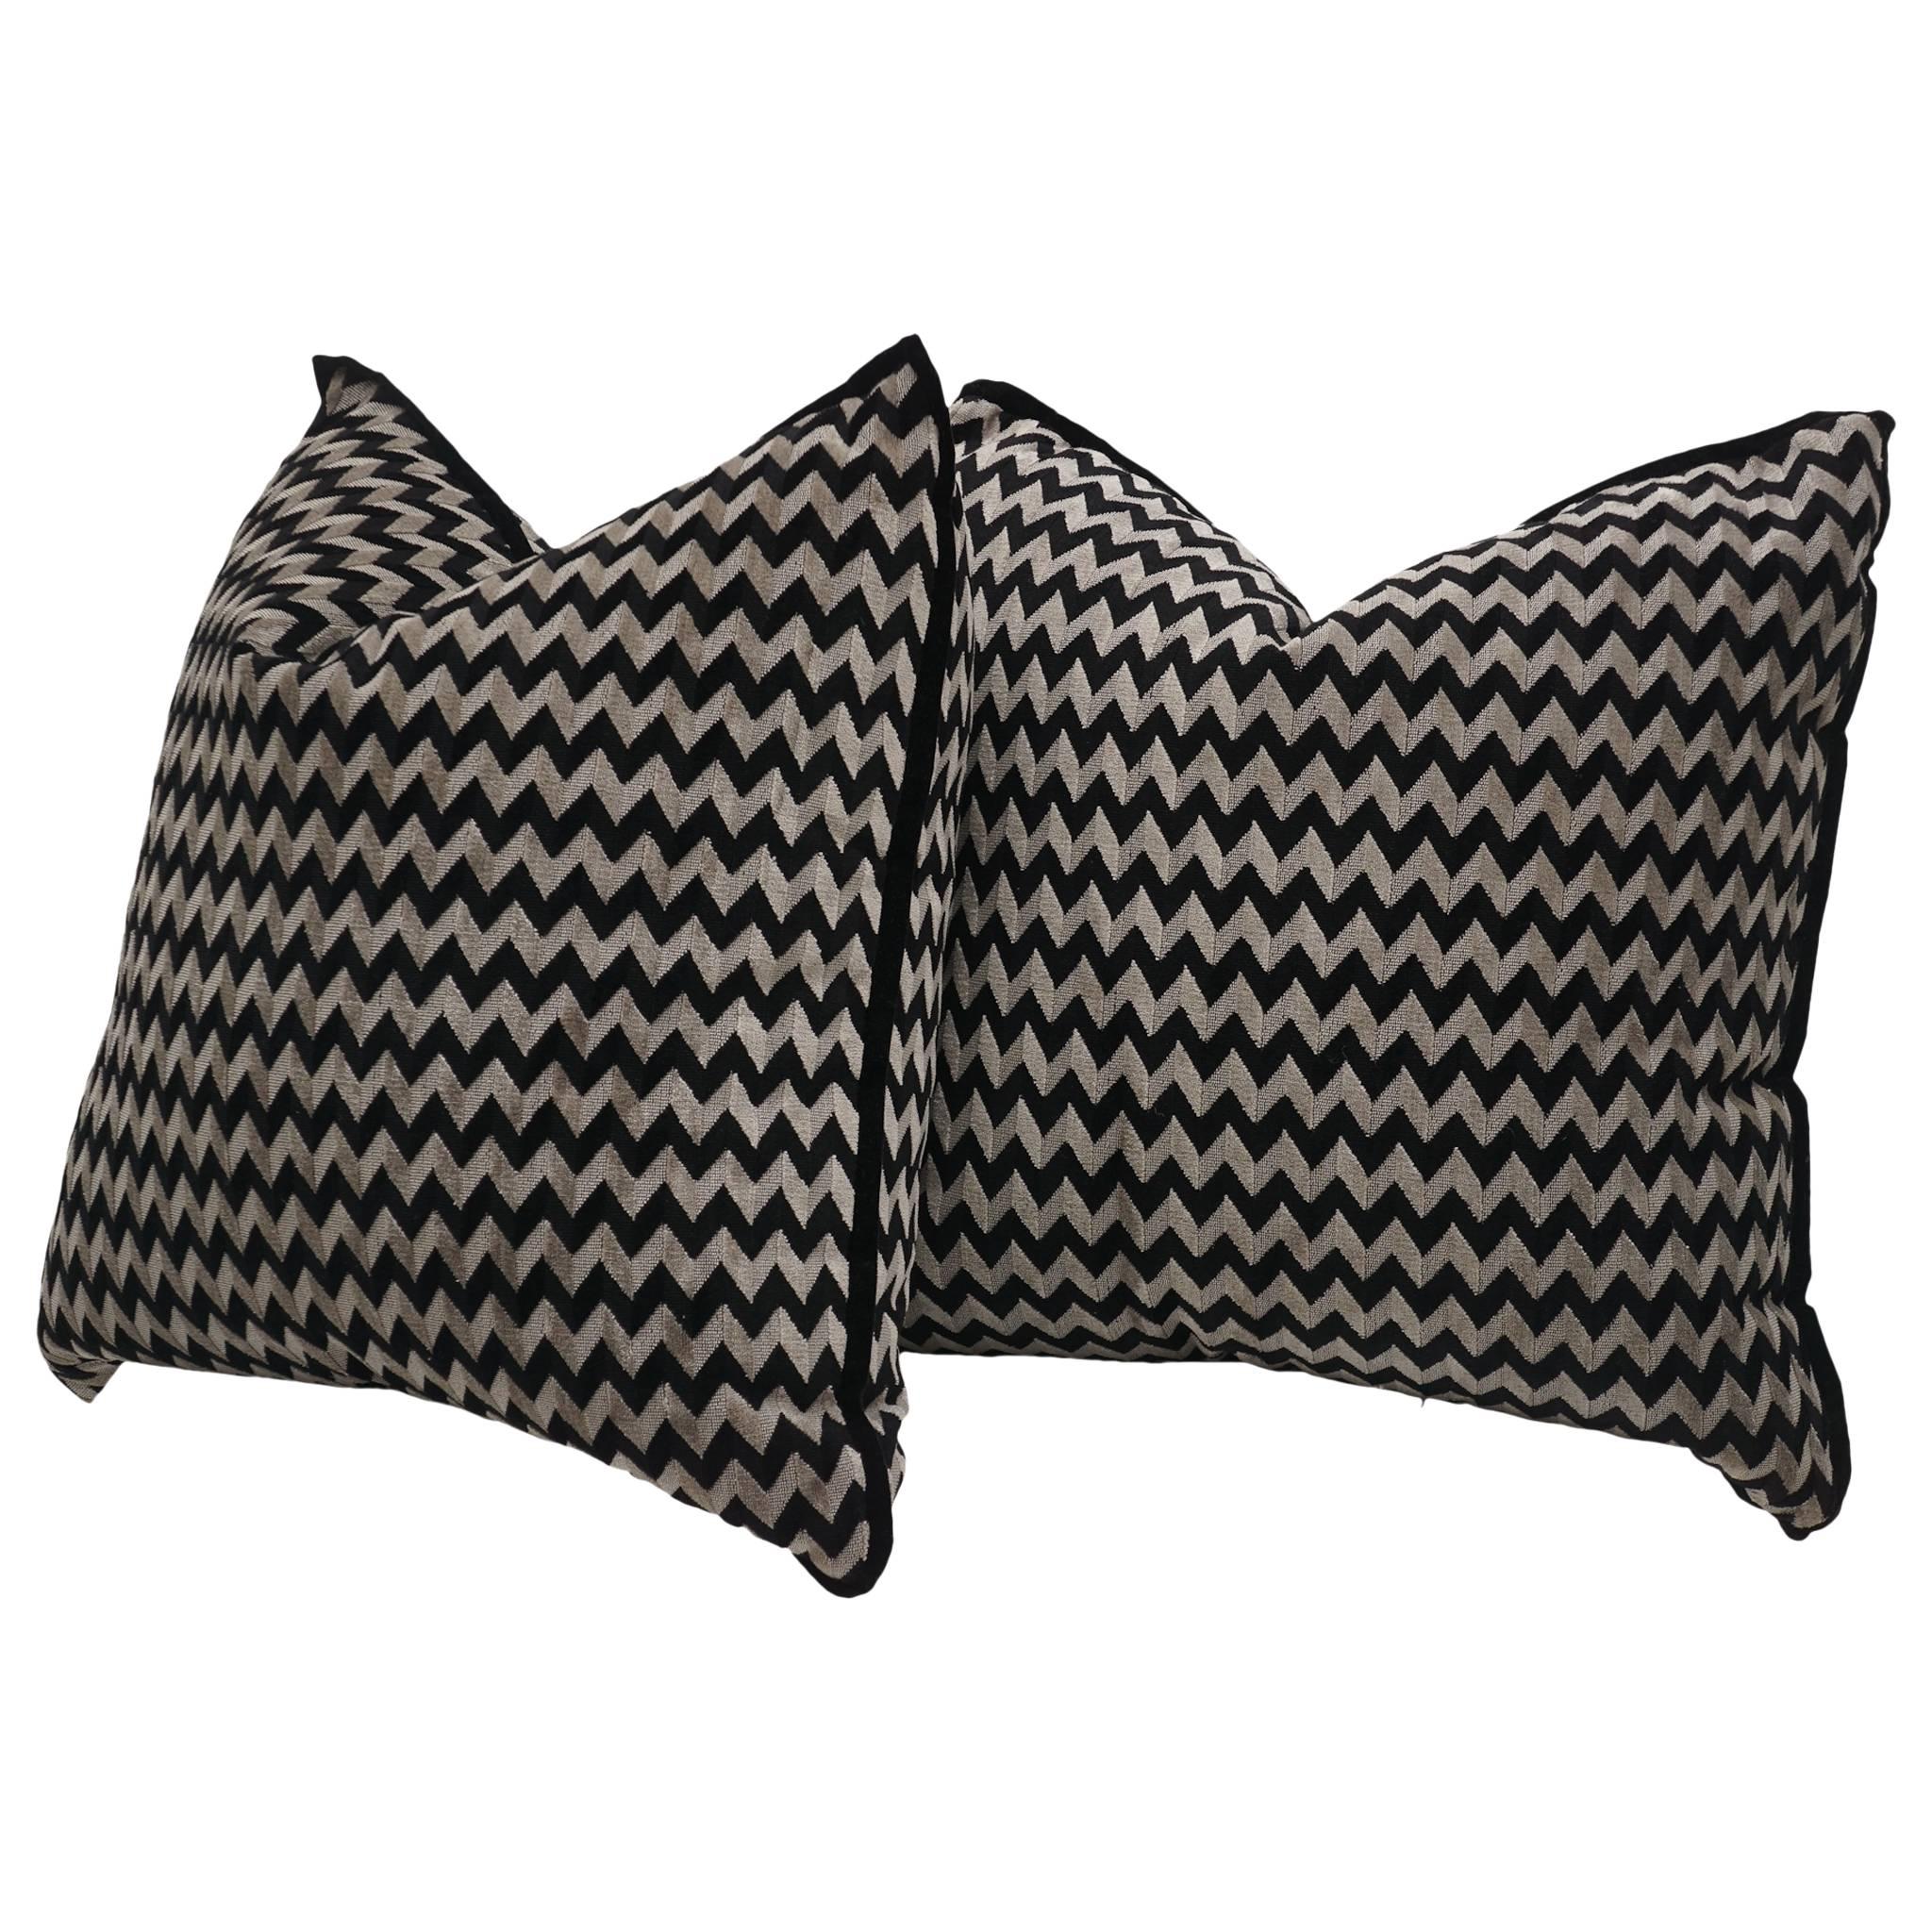 Zig Zag Pillows For Sale